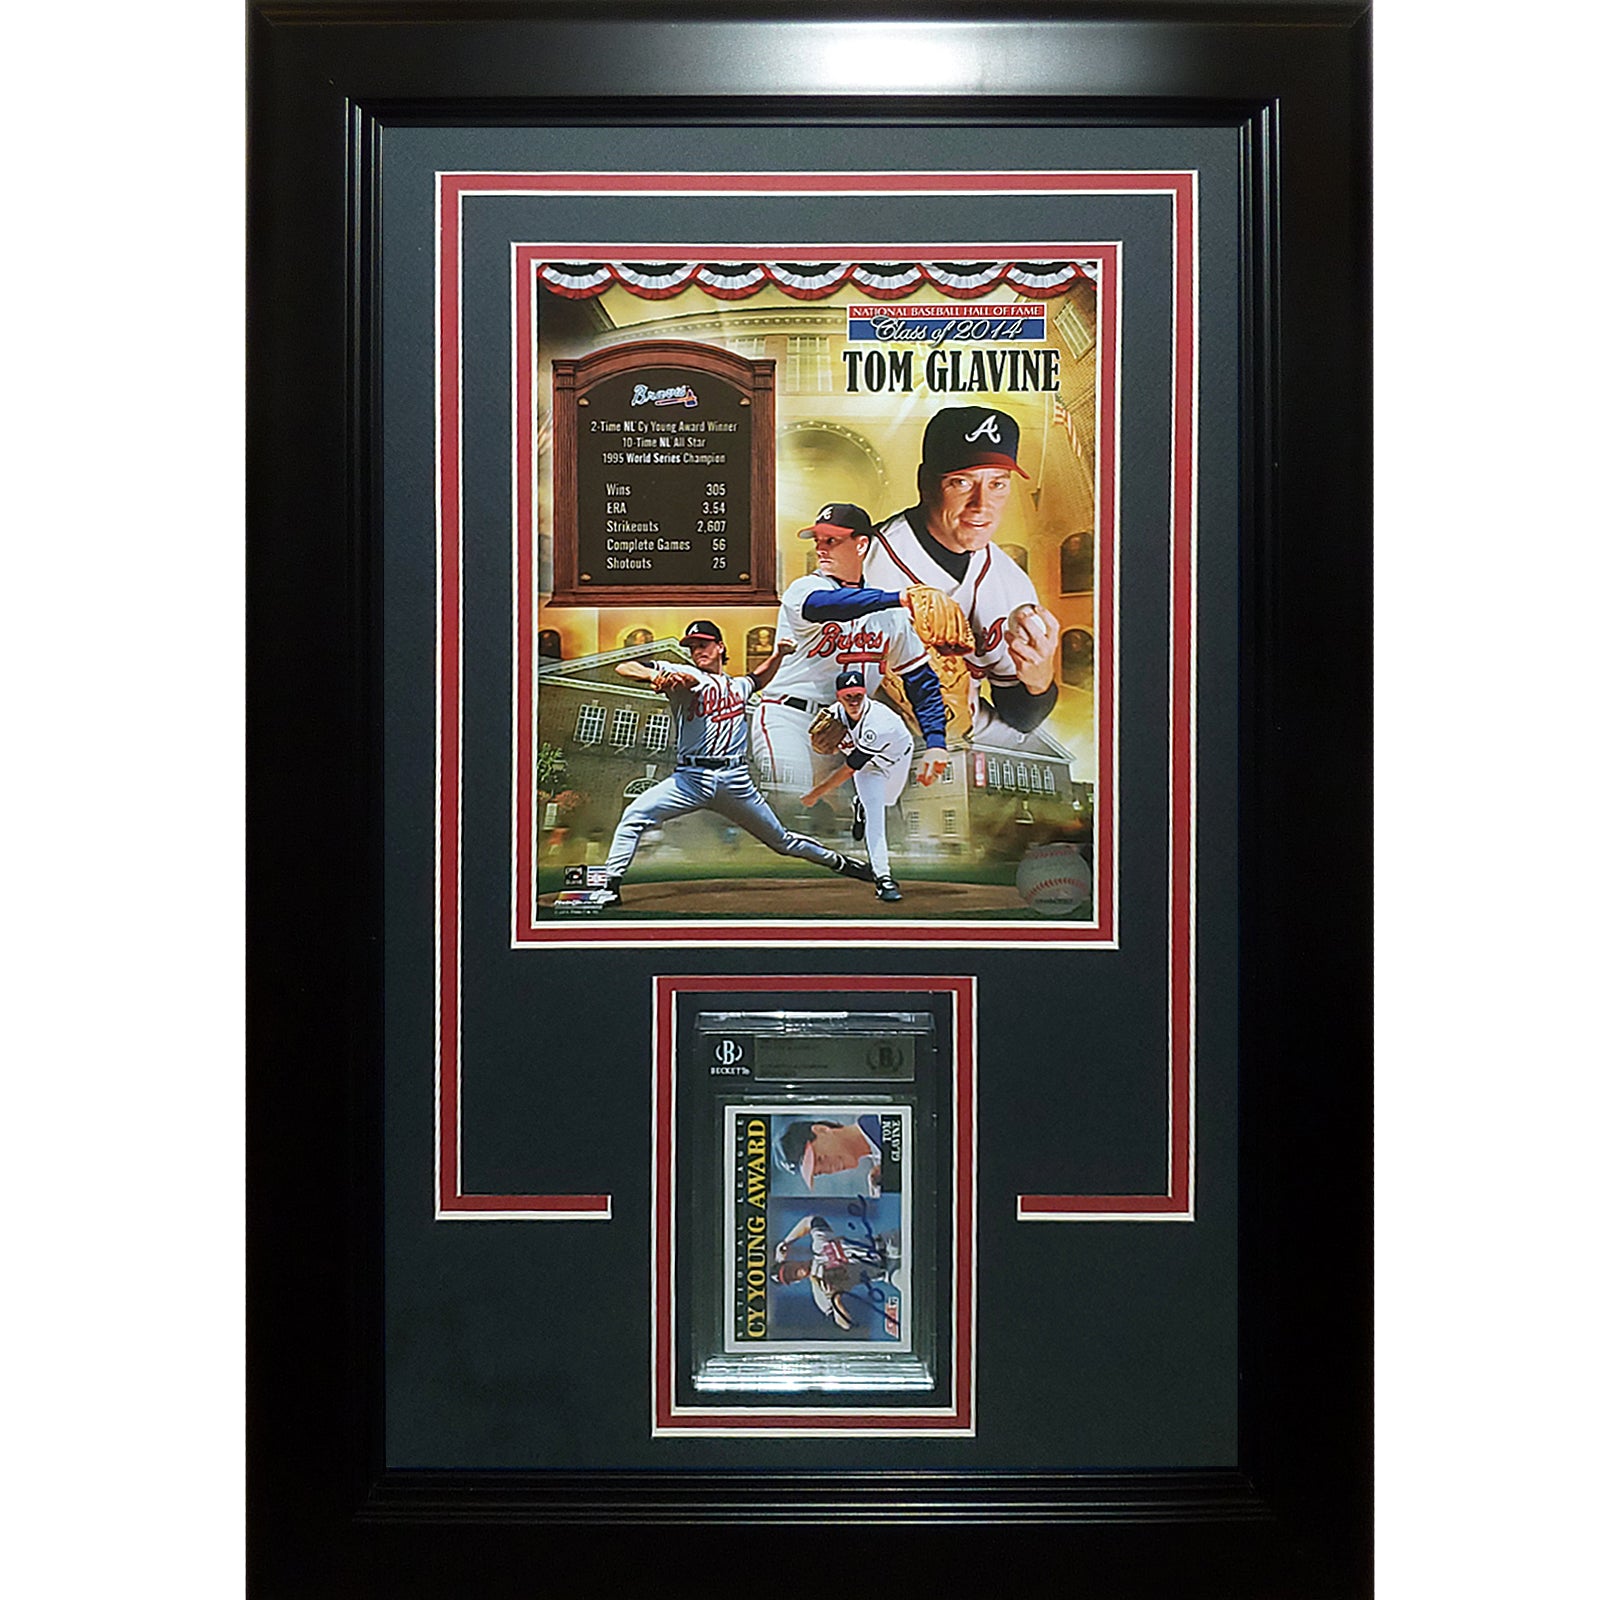 Tom Glavine Autographed Baseball Card Deluxe Framed with Atlanta Braves (HOF Collage) 8x10 Photo